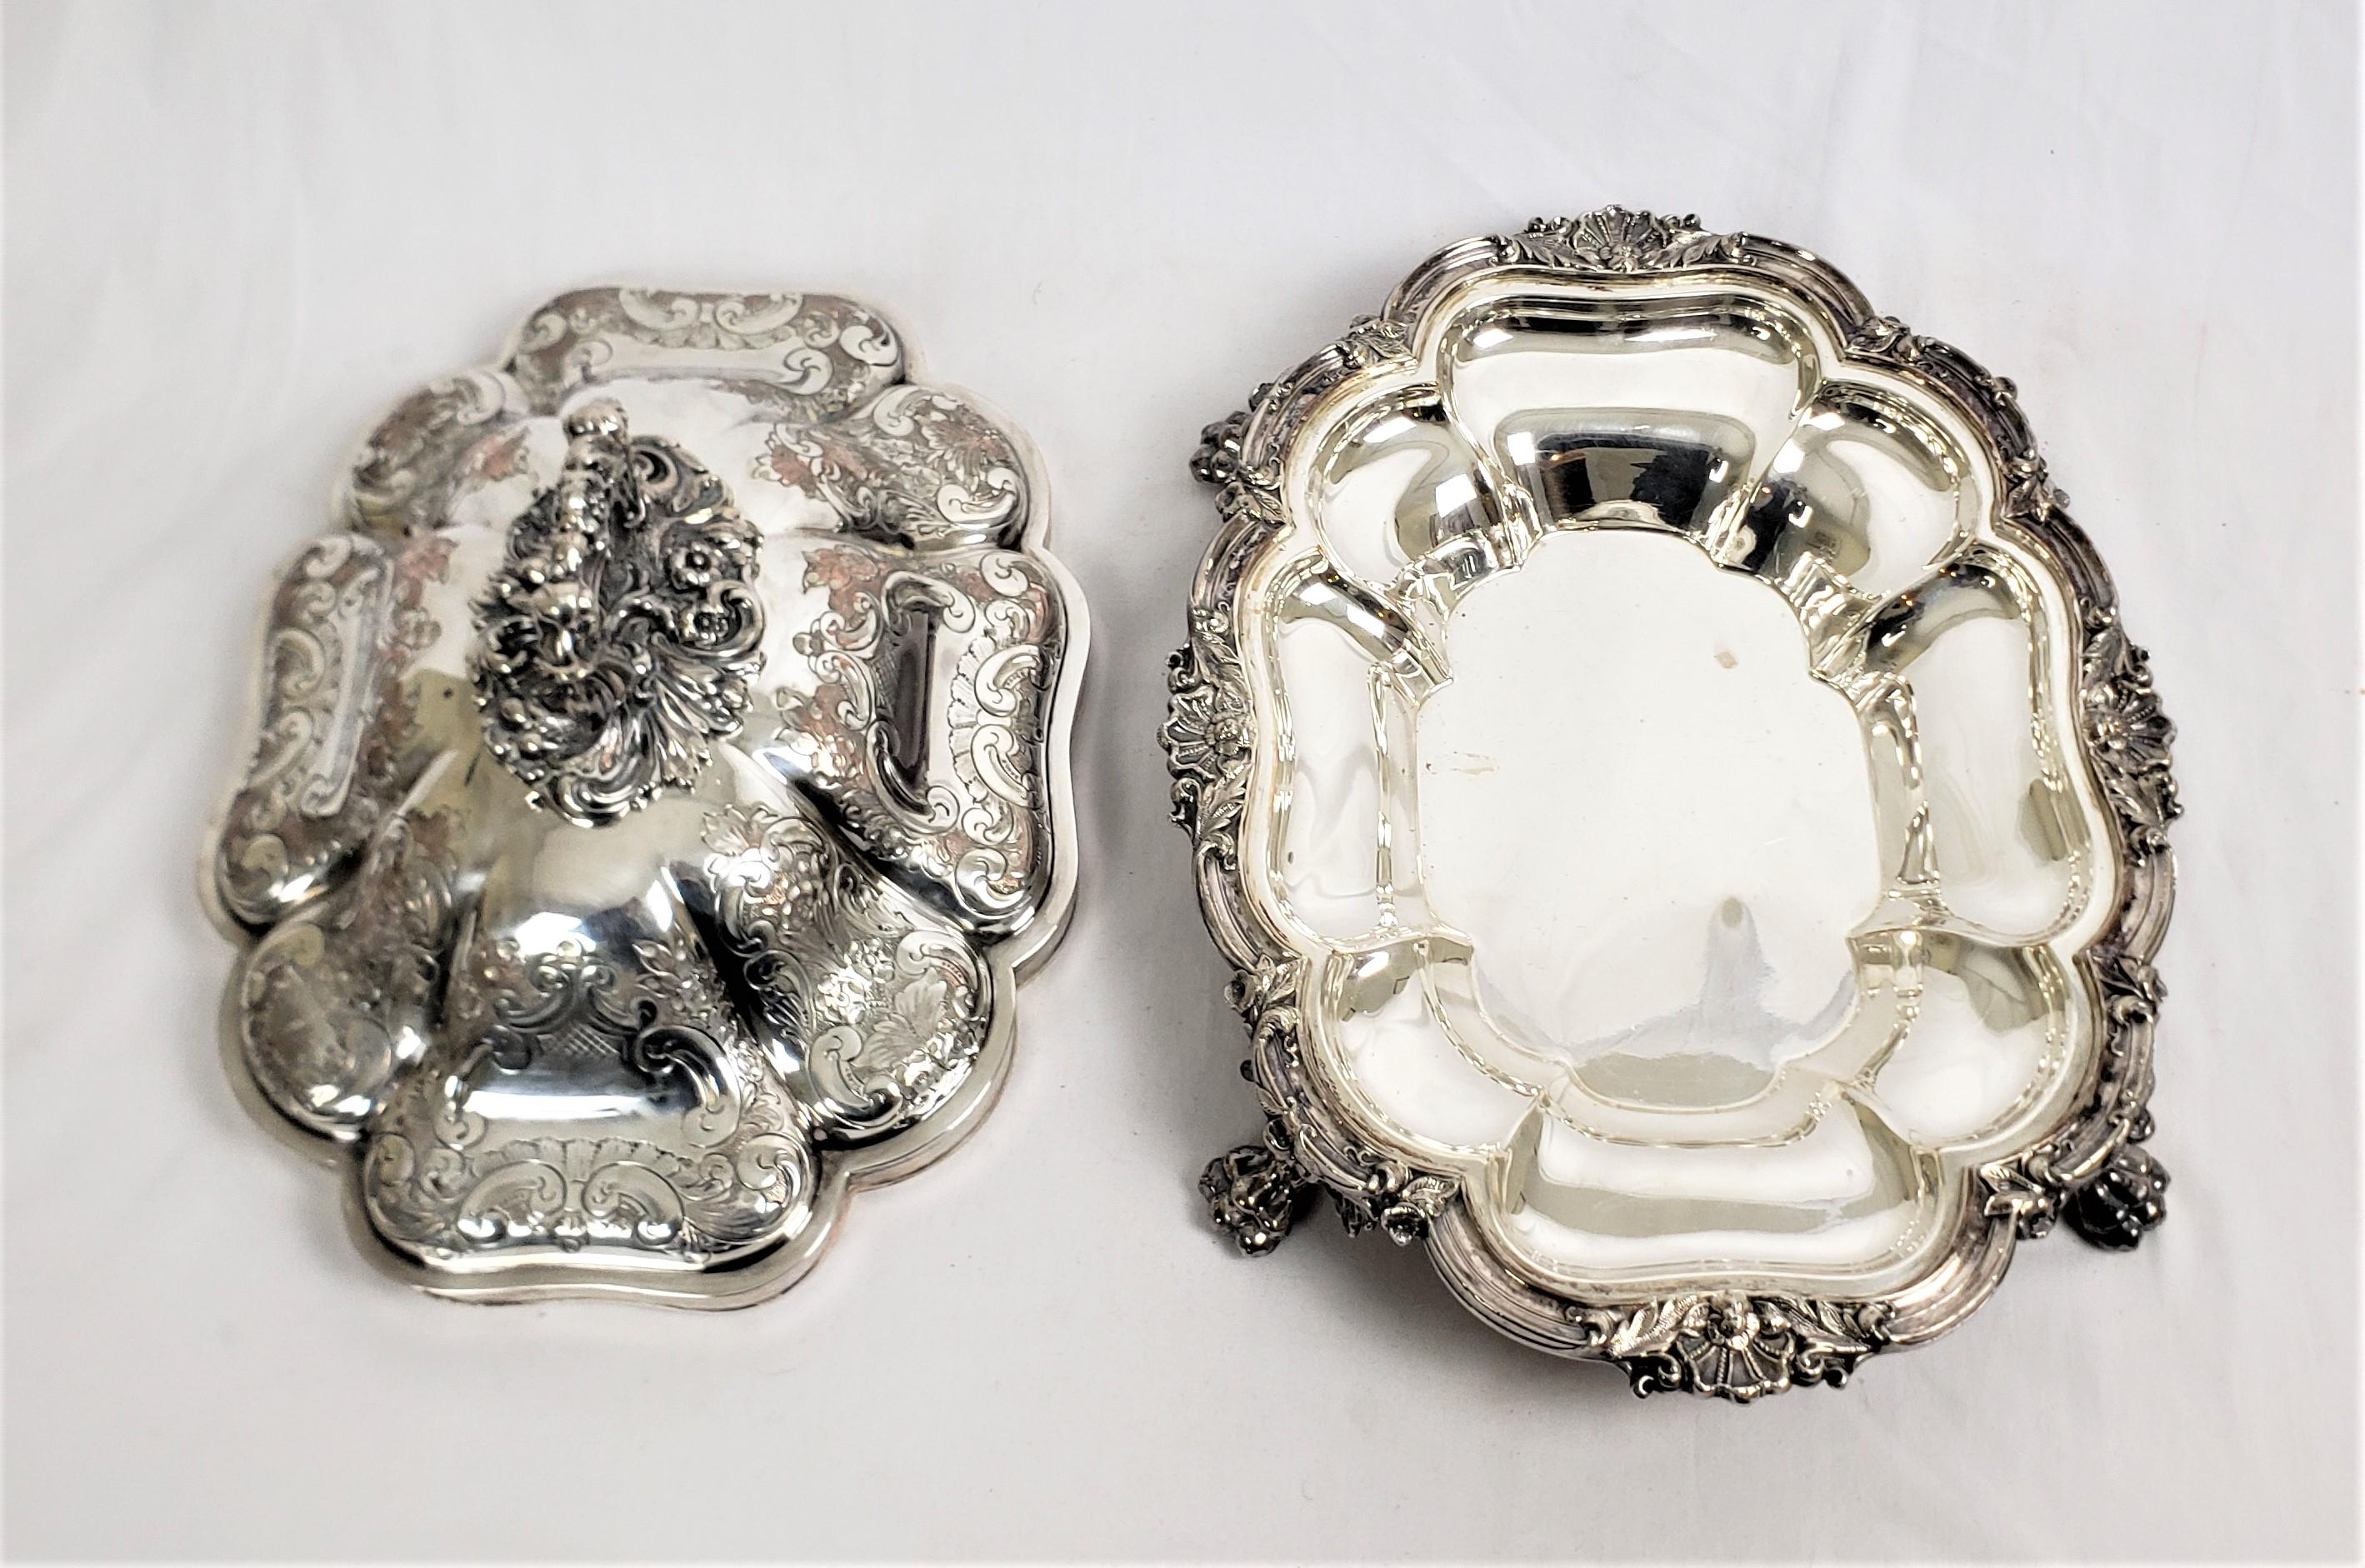 Antique Barker-Ellis Silver Plated Covered Entree Server with Floral Decoration In Good Condition For Sale In Hamilton, Ontario